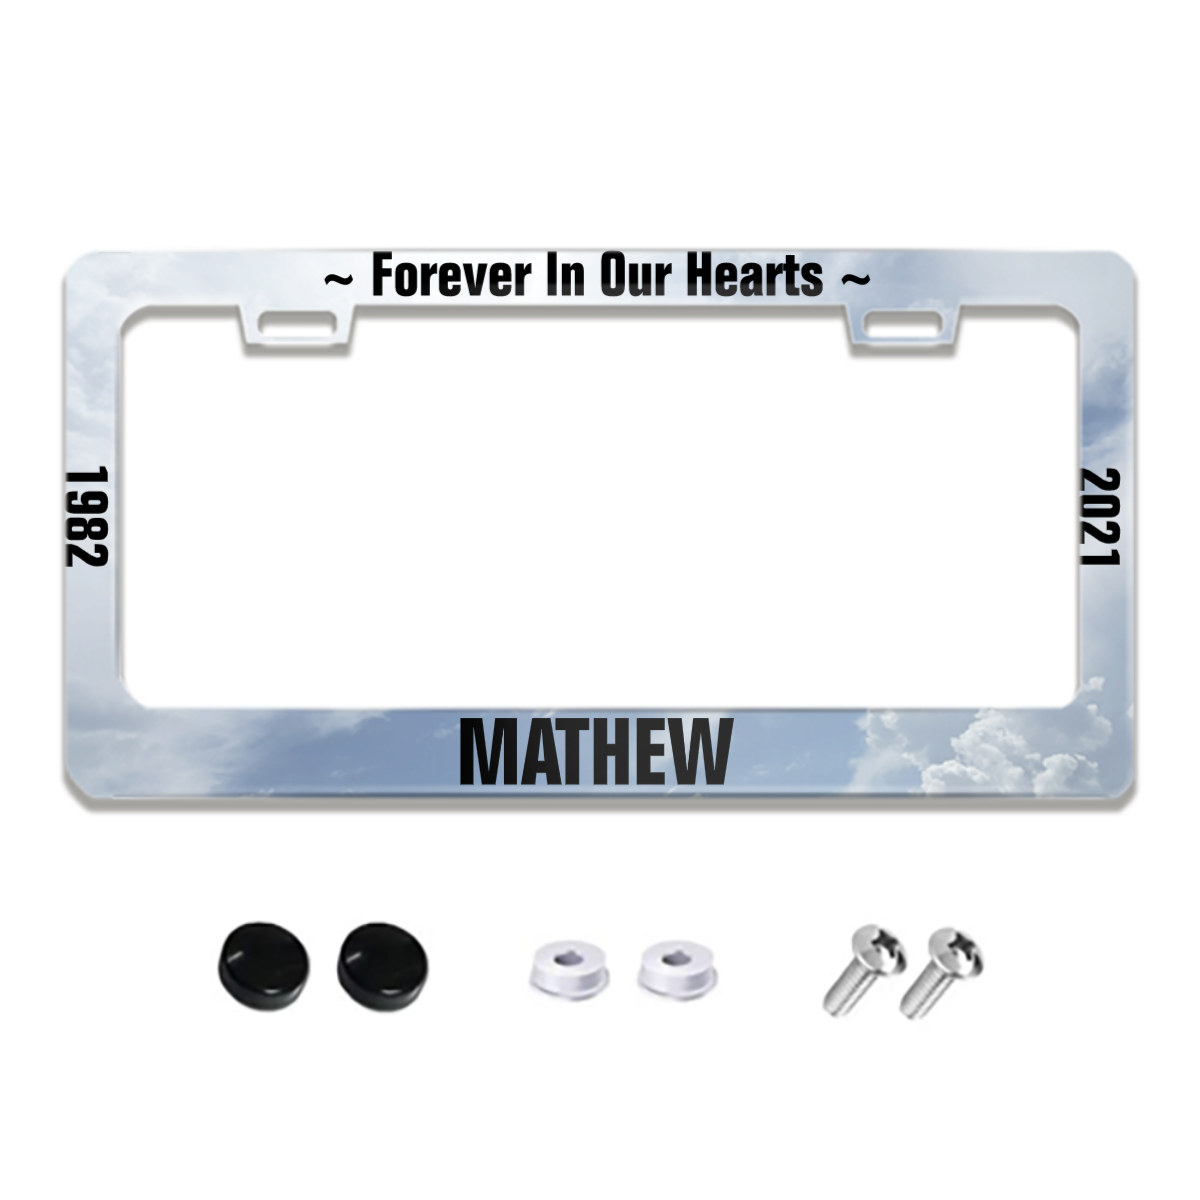 Memorial License Plate with Clouds / Hearts License Plate Frame